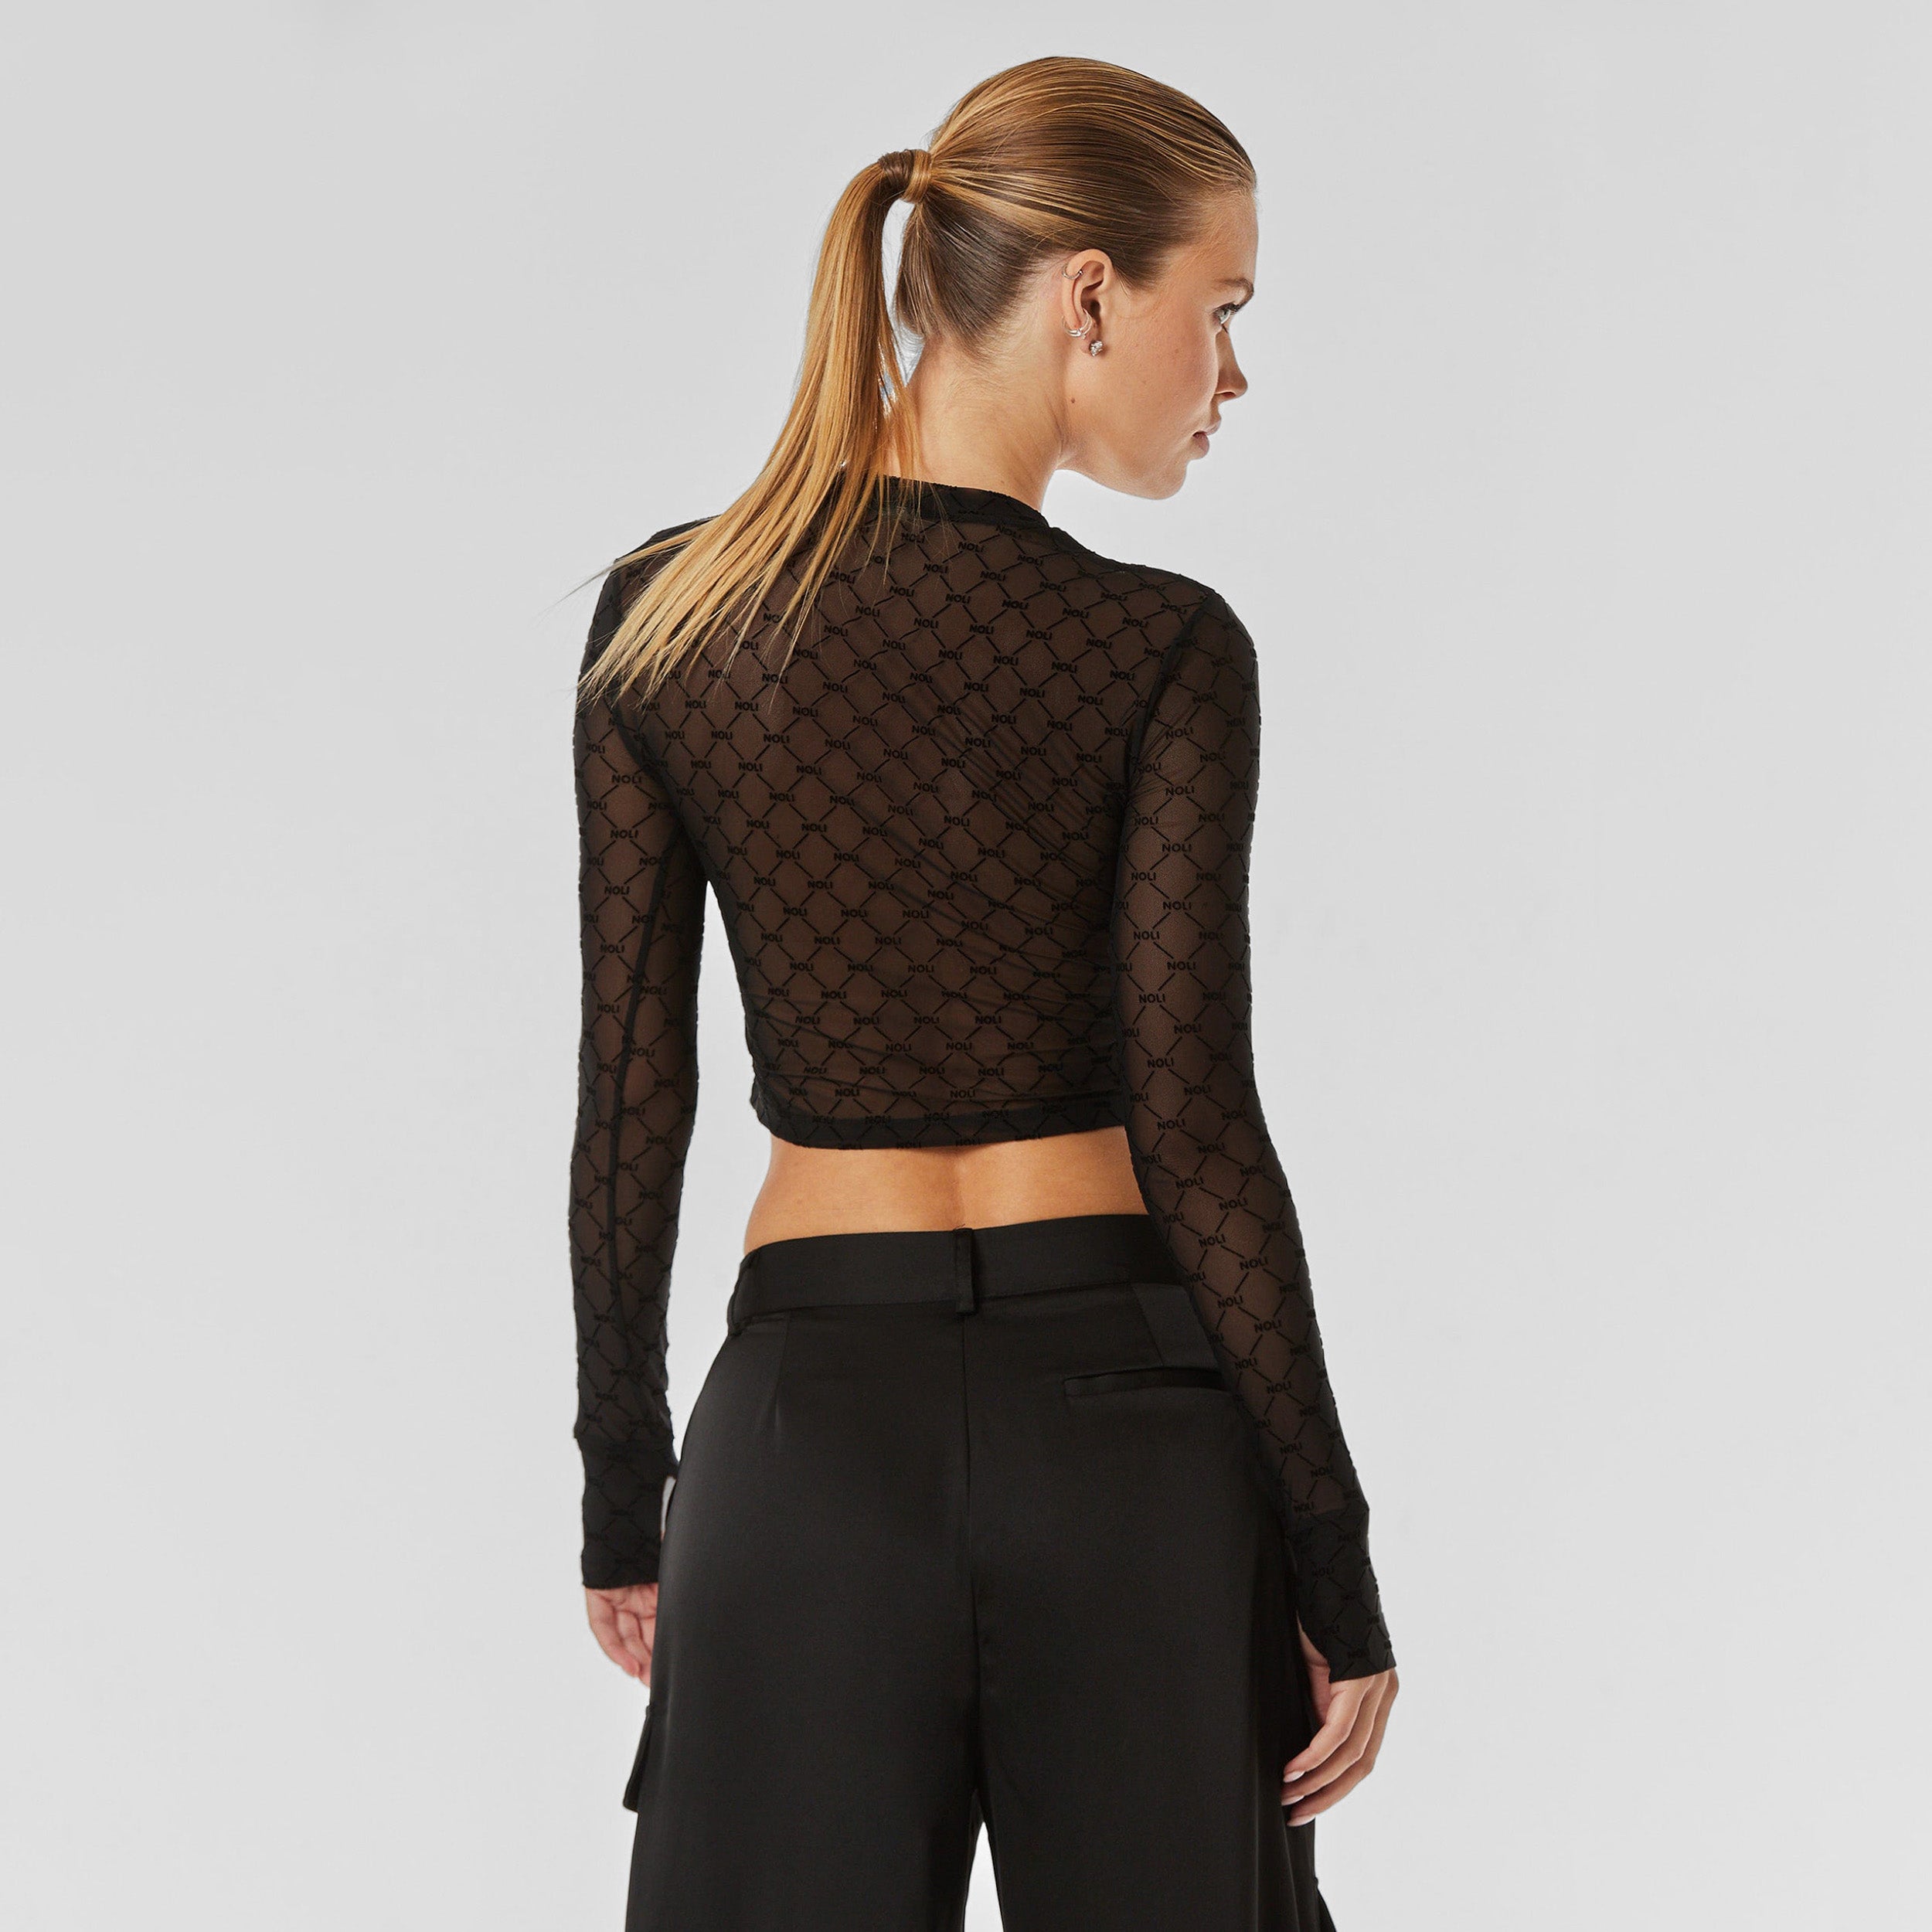 Rear view of woman wearing top featuring our ultra-soft and comfortable NOLI monogram flocked mesh topped with a slim fit and thumbholes